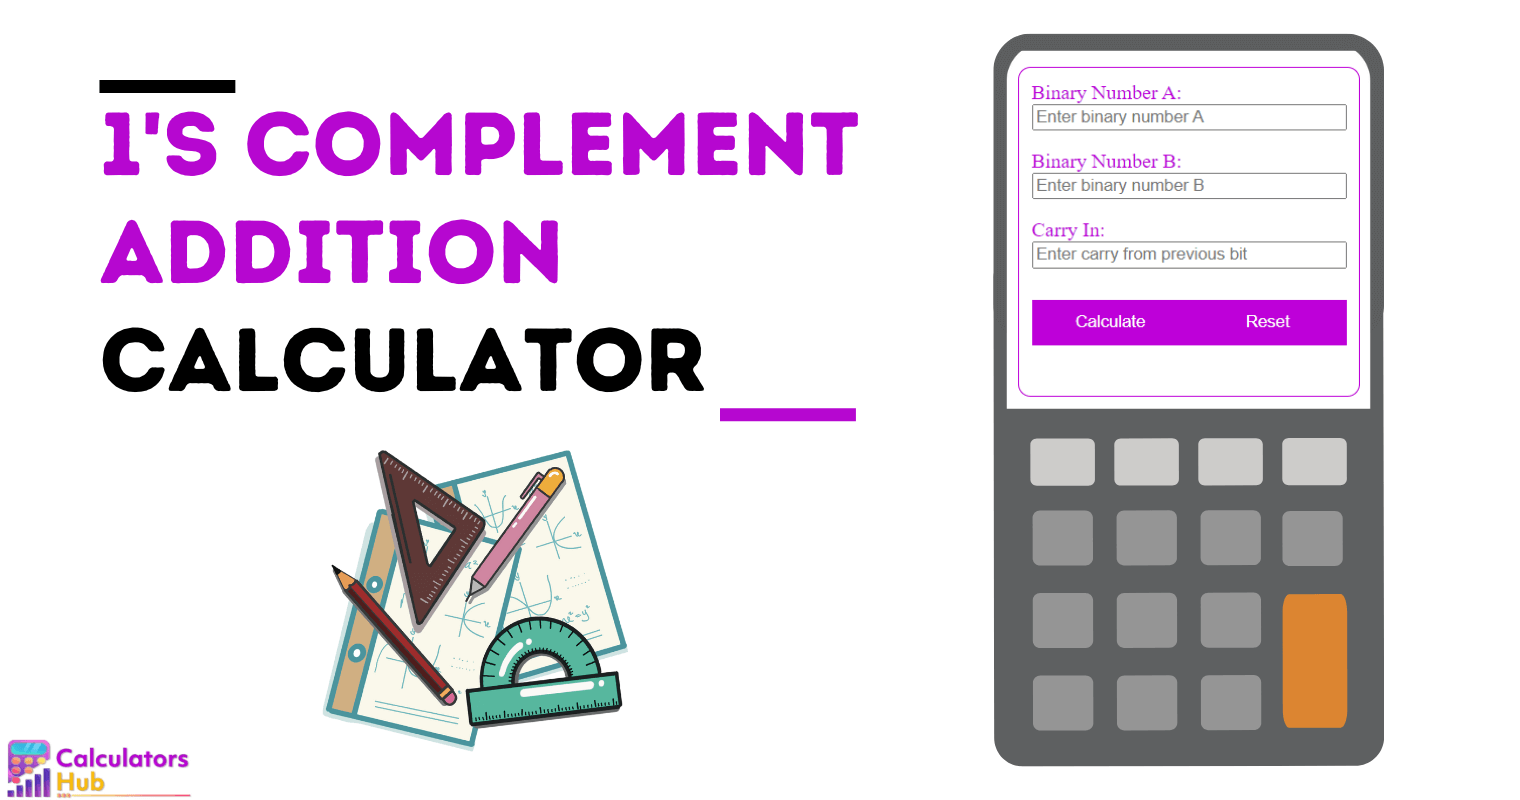 1's Complement Addition Calculator